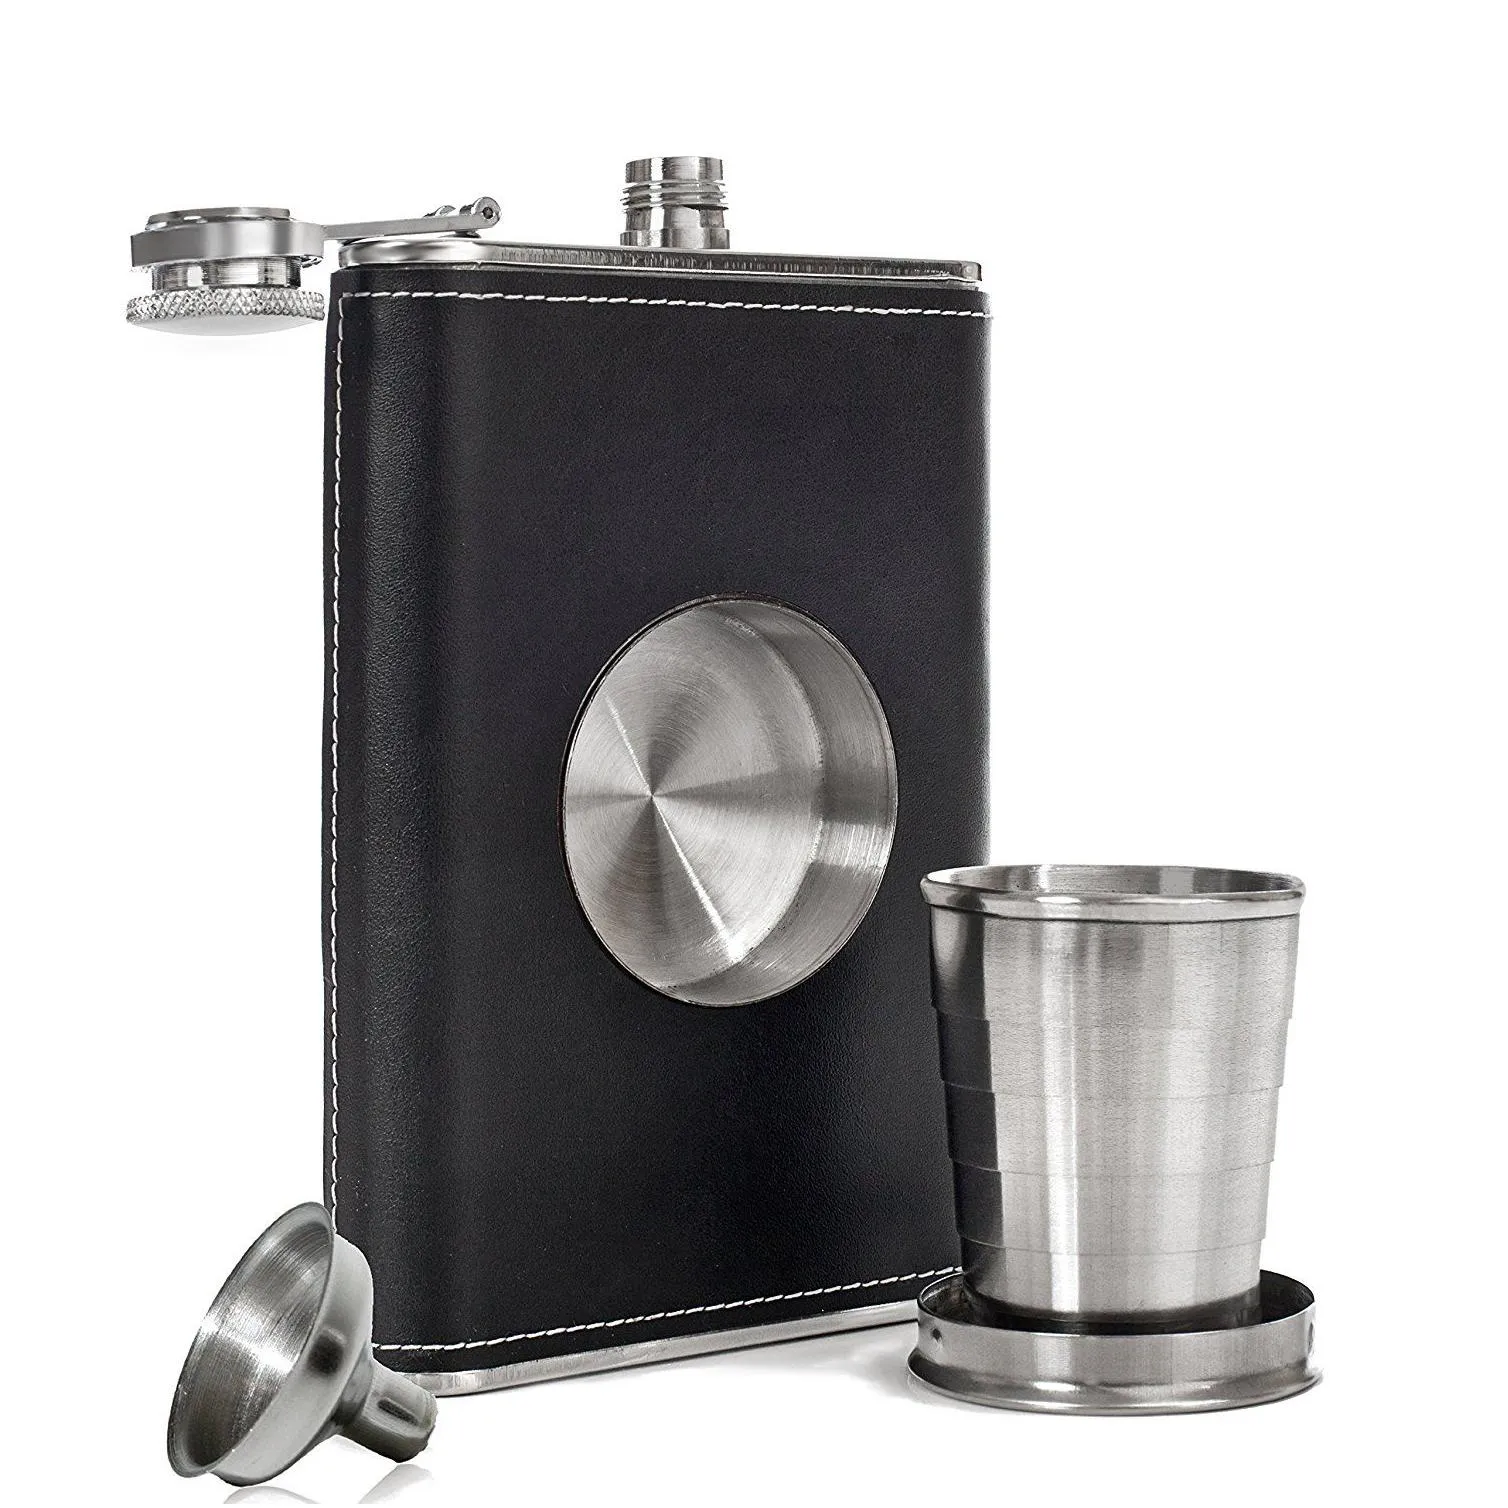 8oz flask with a builtin collapsible shot glass flask funnel stainless steel premium leather wrapping black leather